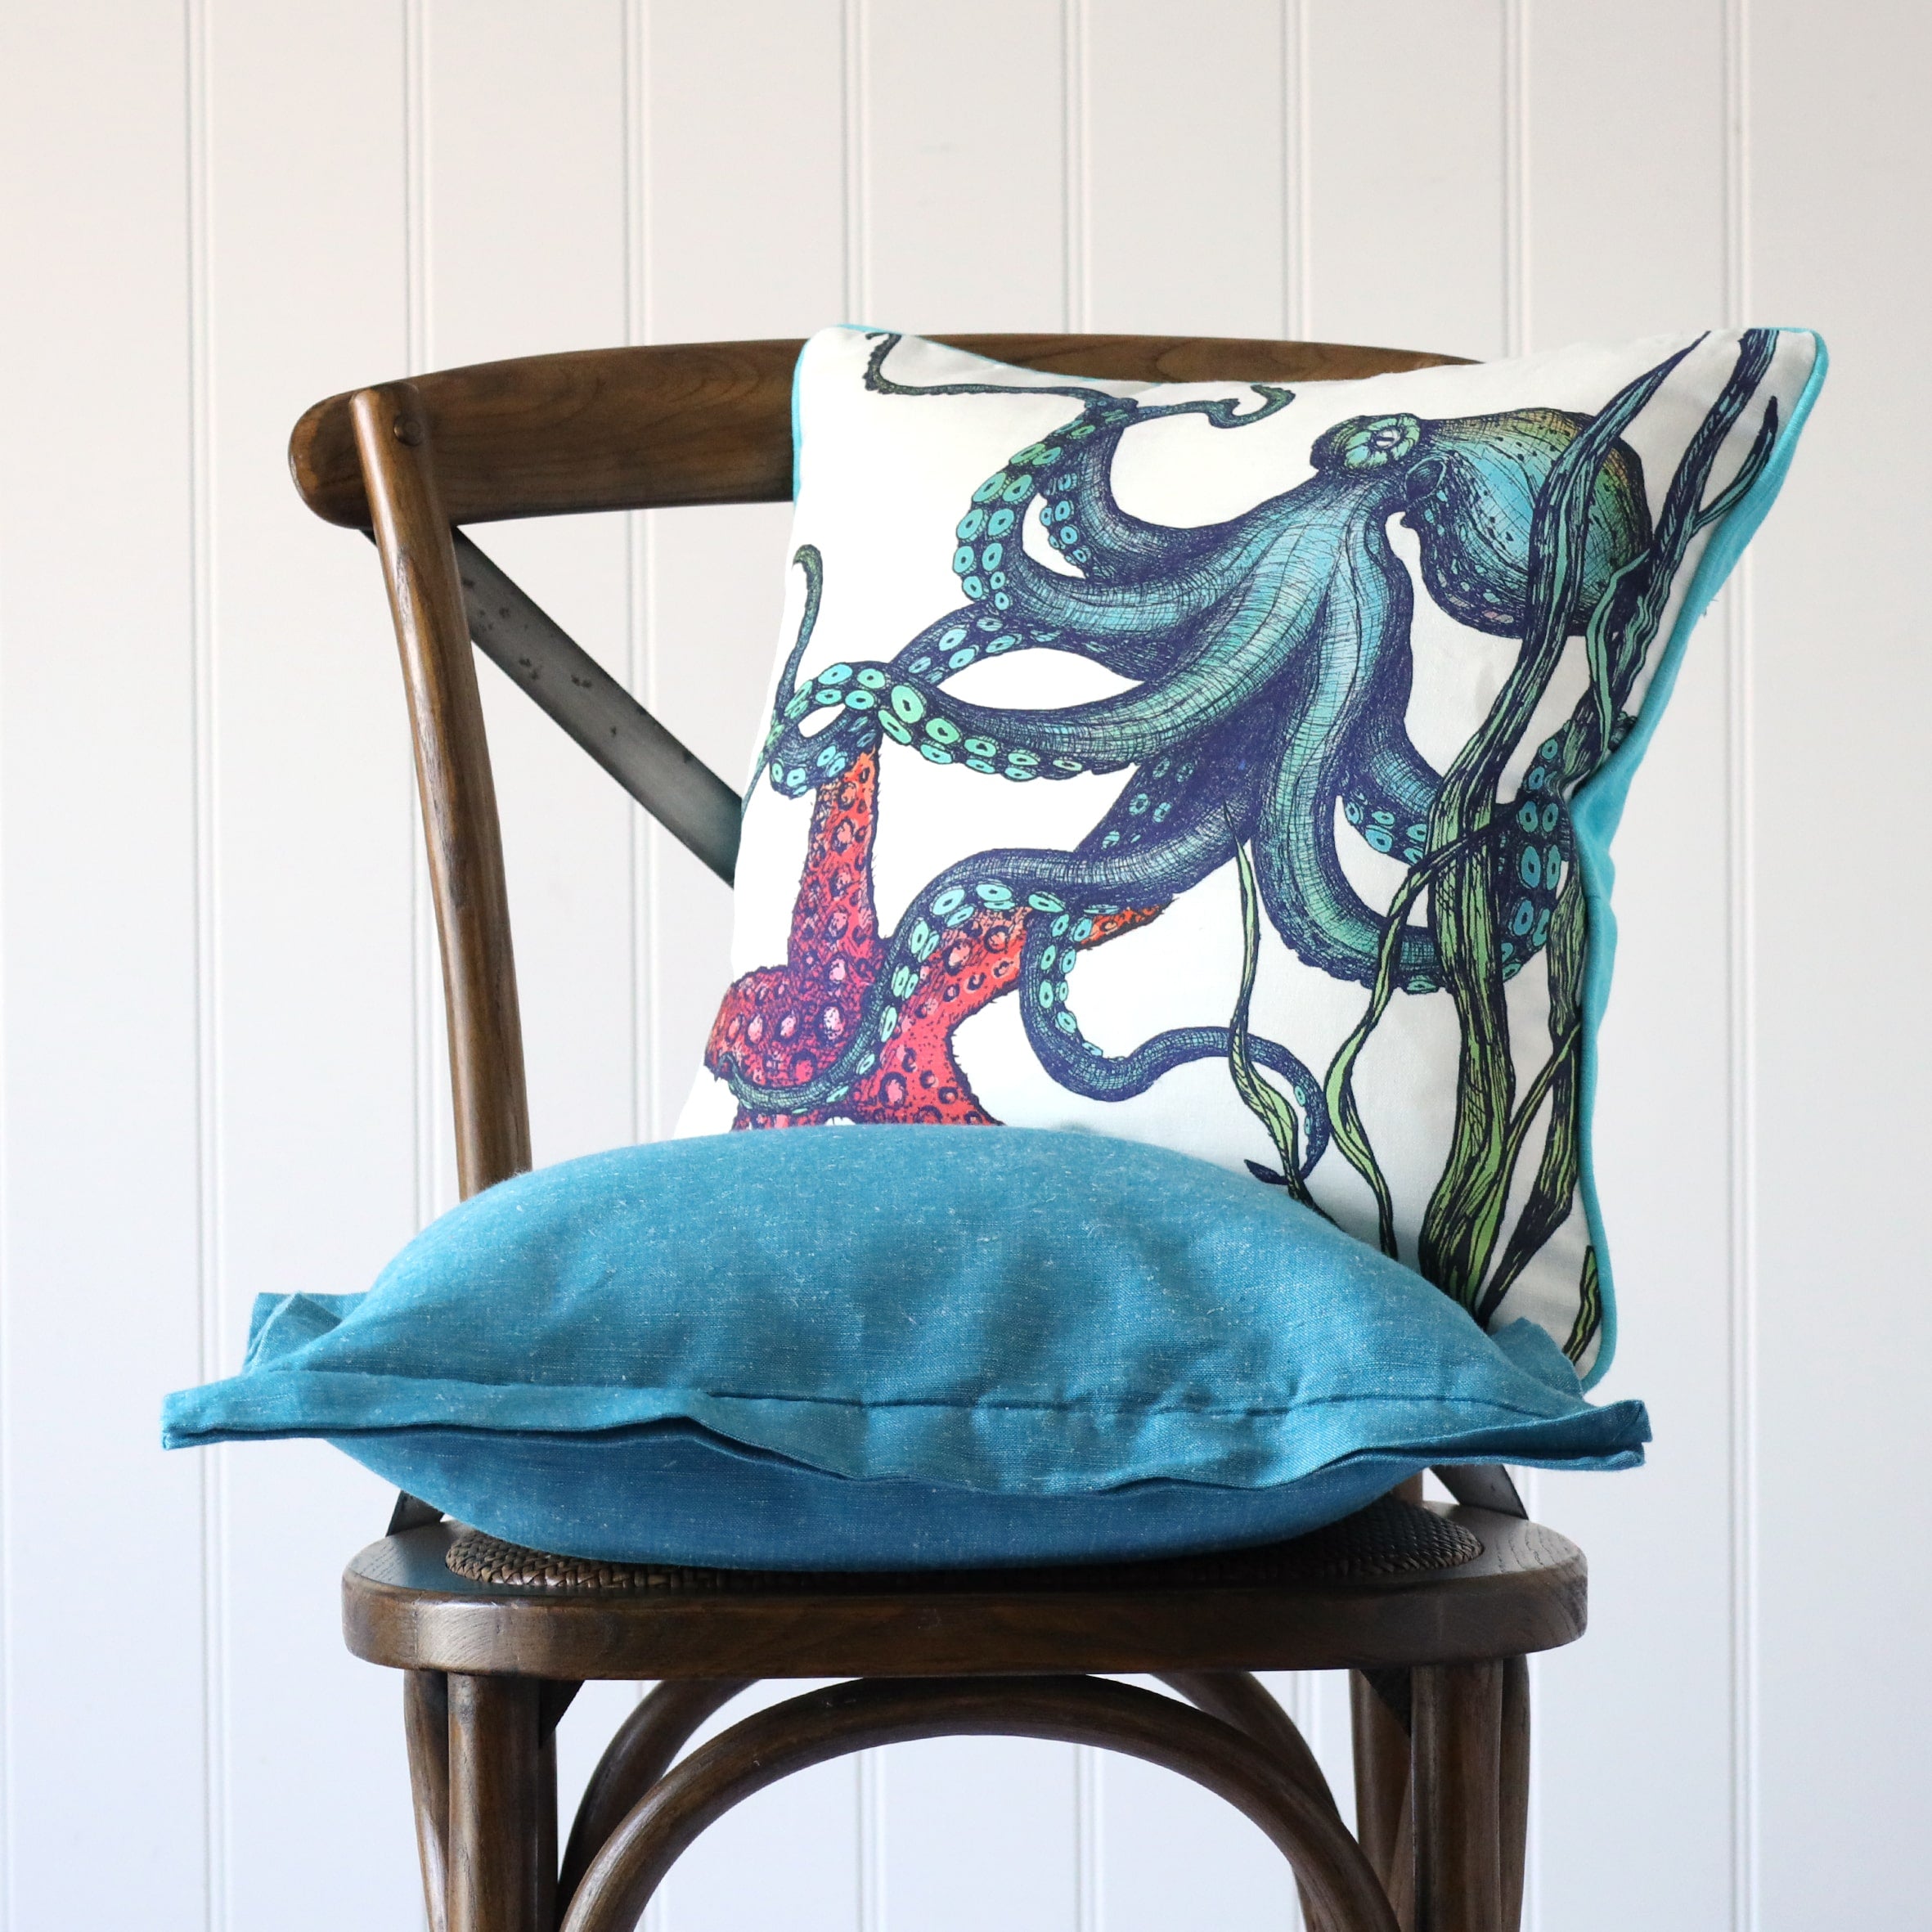 white cushion with brightly coloured illustrated of an octopus and starfish on the front, placed on a turquoise linen cushion on a wooden chair